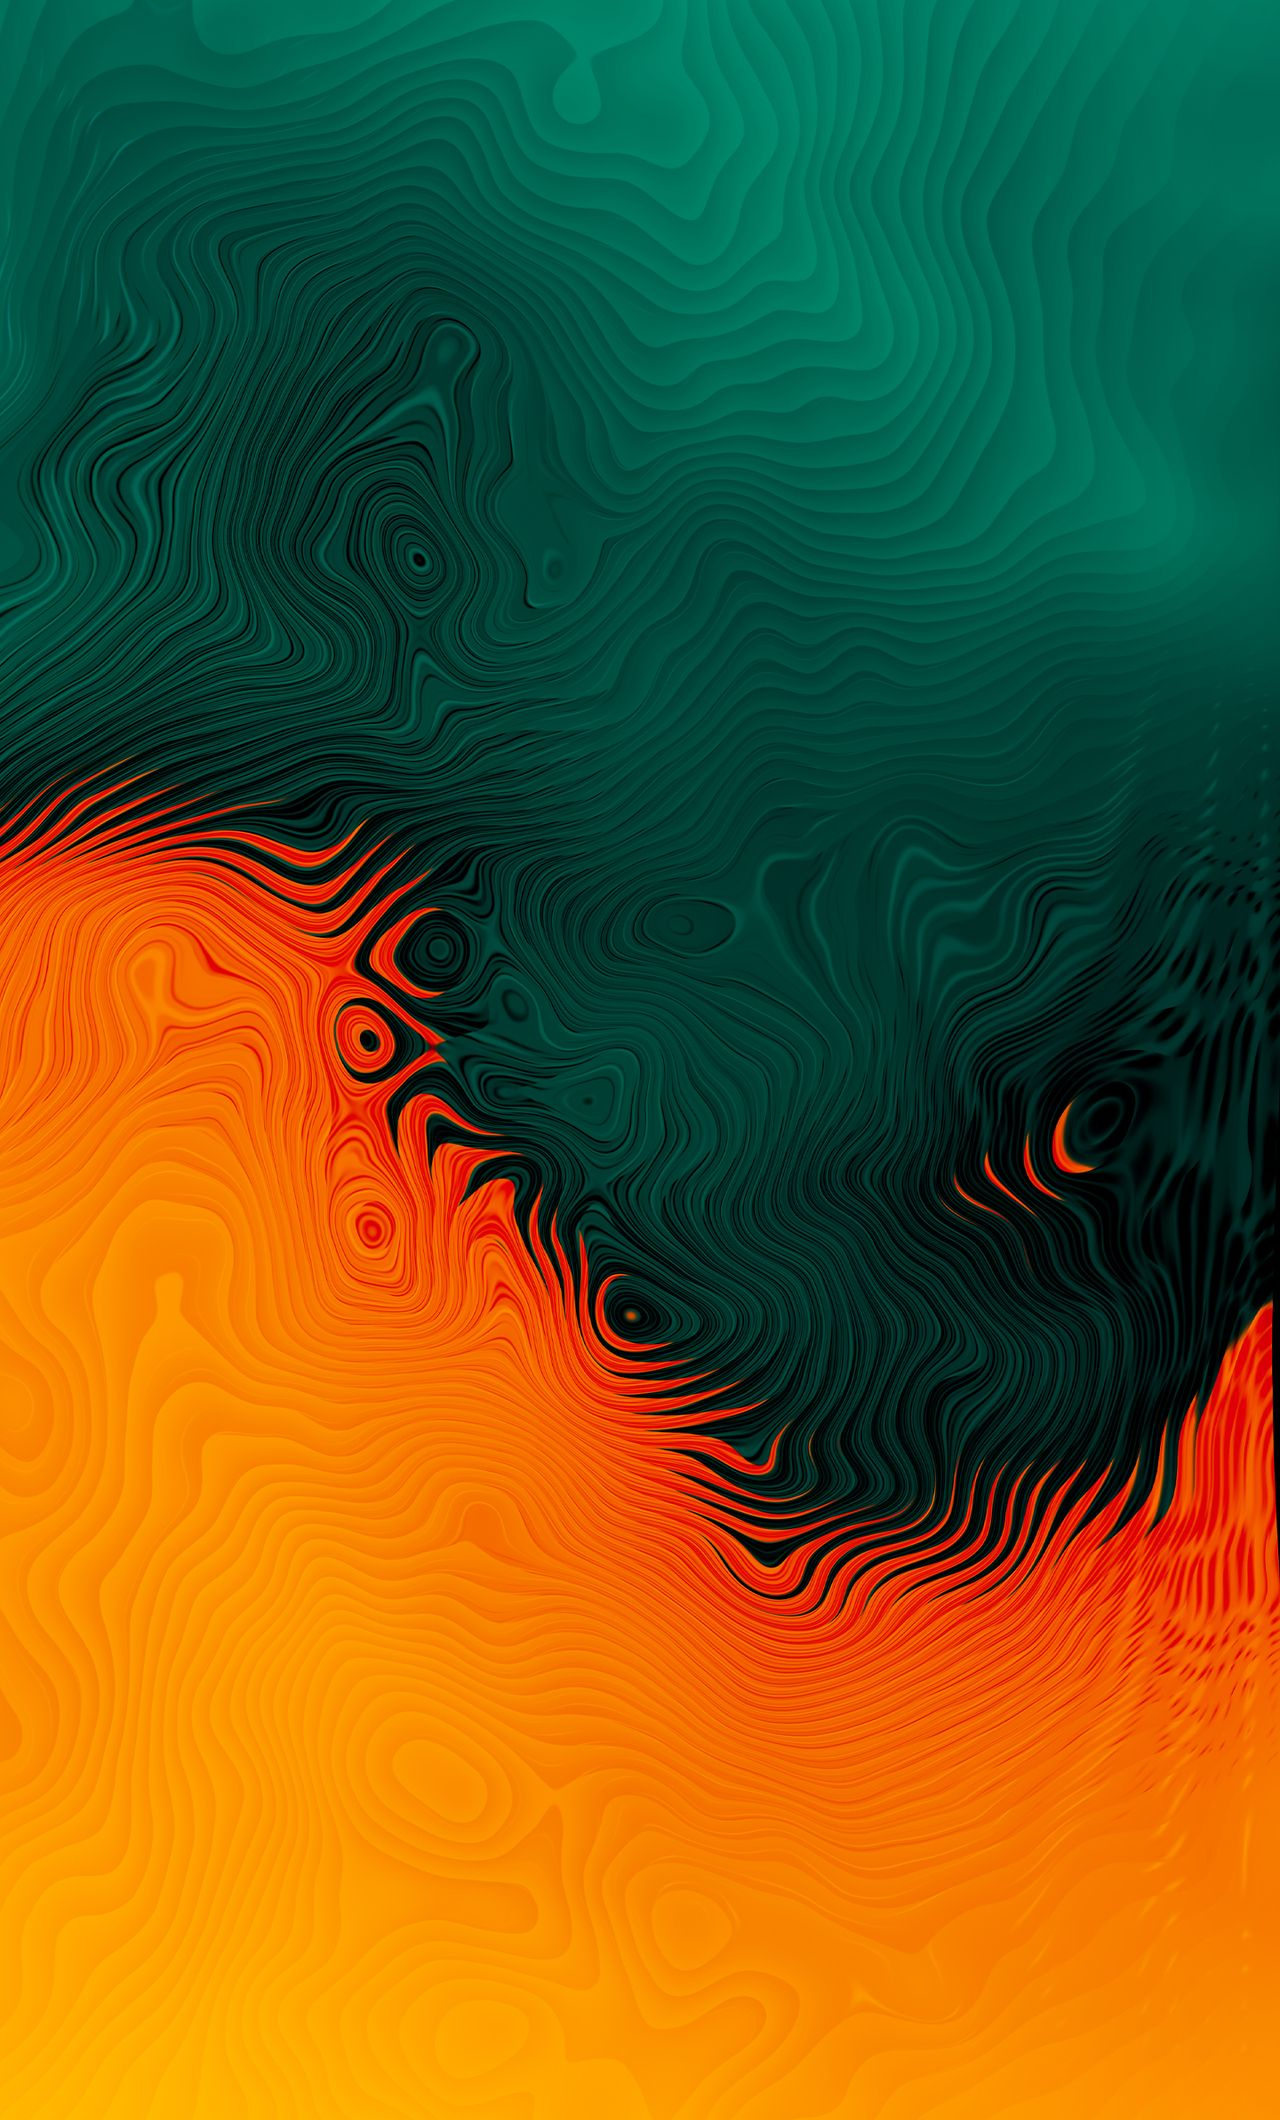 1280x2120 Orange And Green Wallpapers